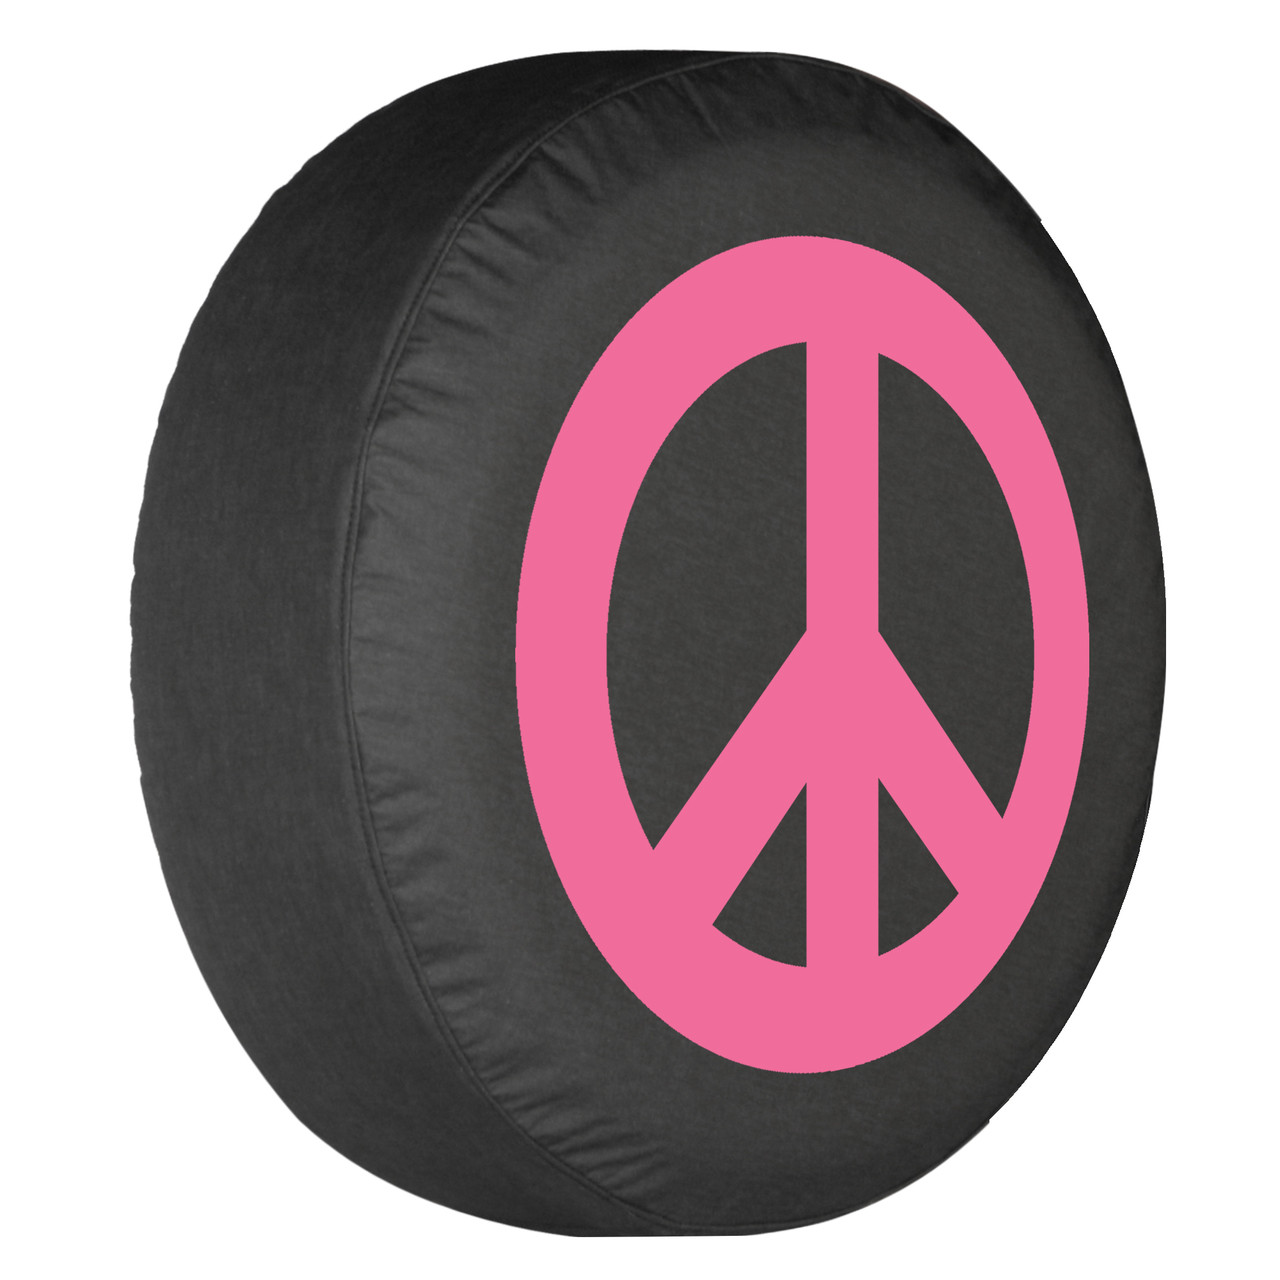 Designer Series Peace Sign Tire Covers by Boomerang Many Colors and Sizes  to Customize Your Vehicle